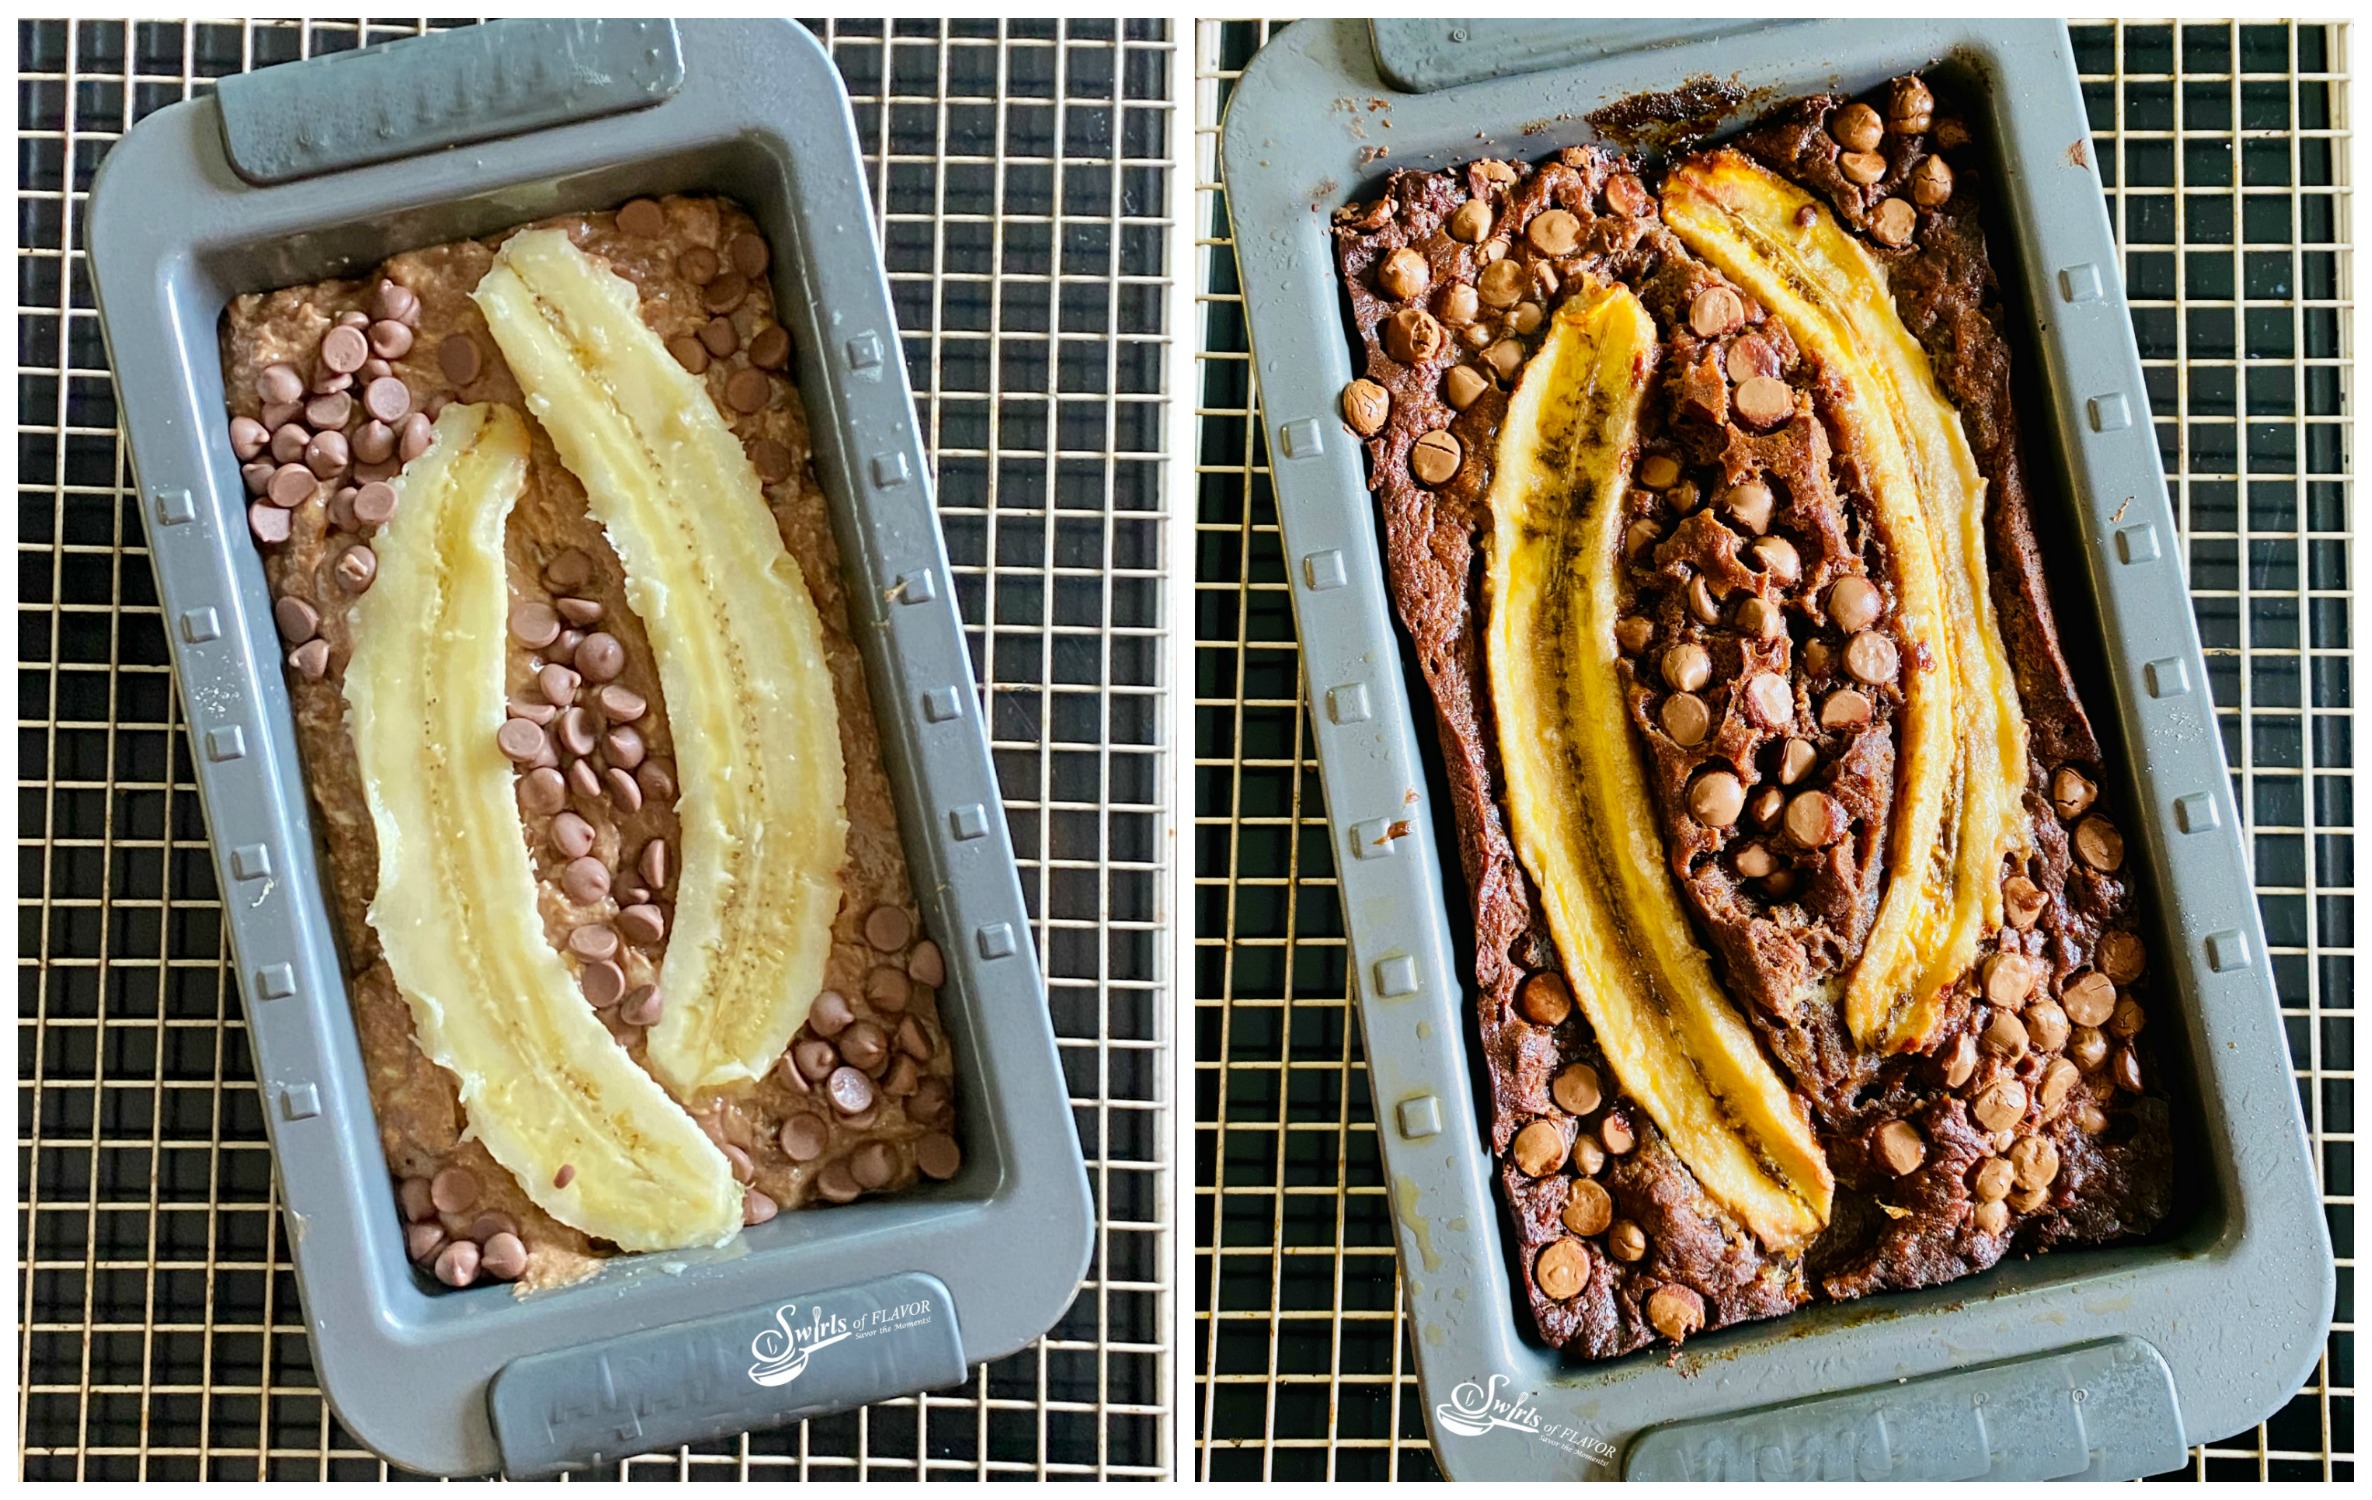 Left to Right: Chocolate banana bread before baking and after baking